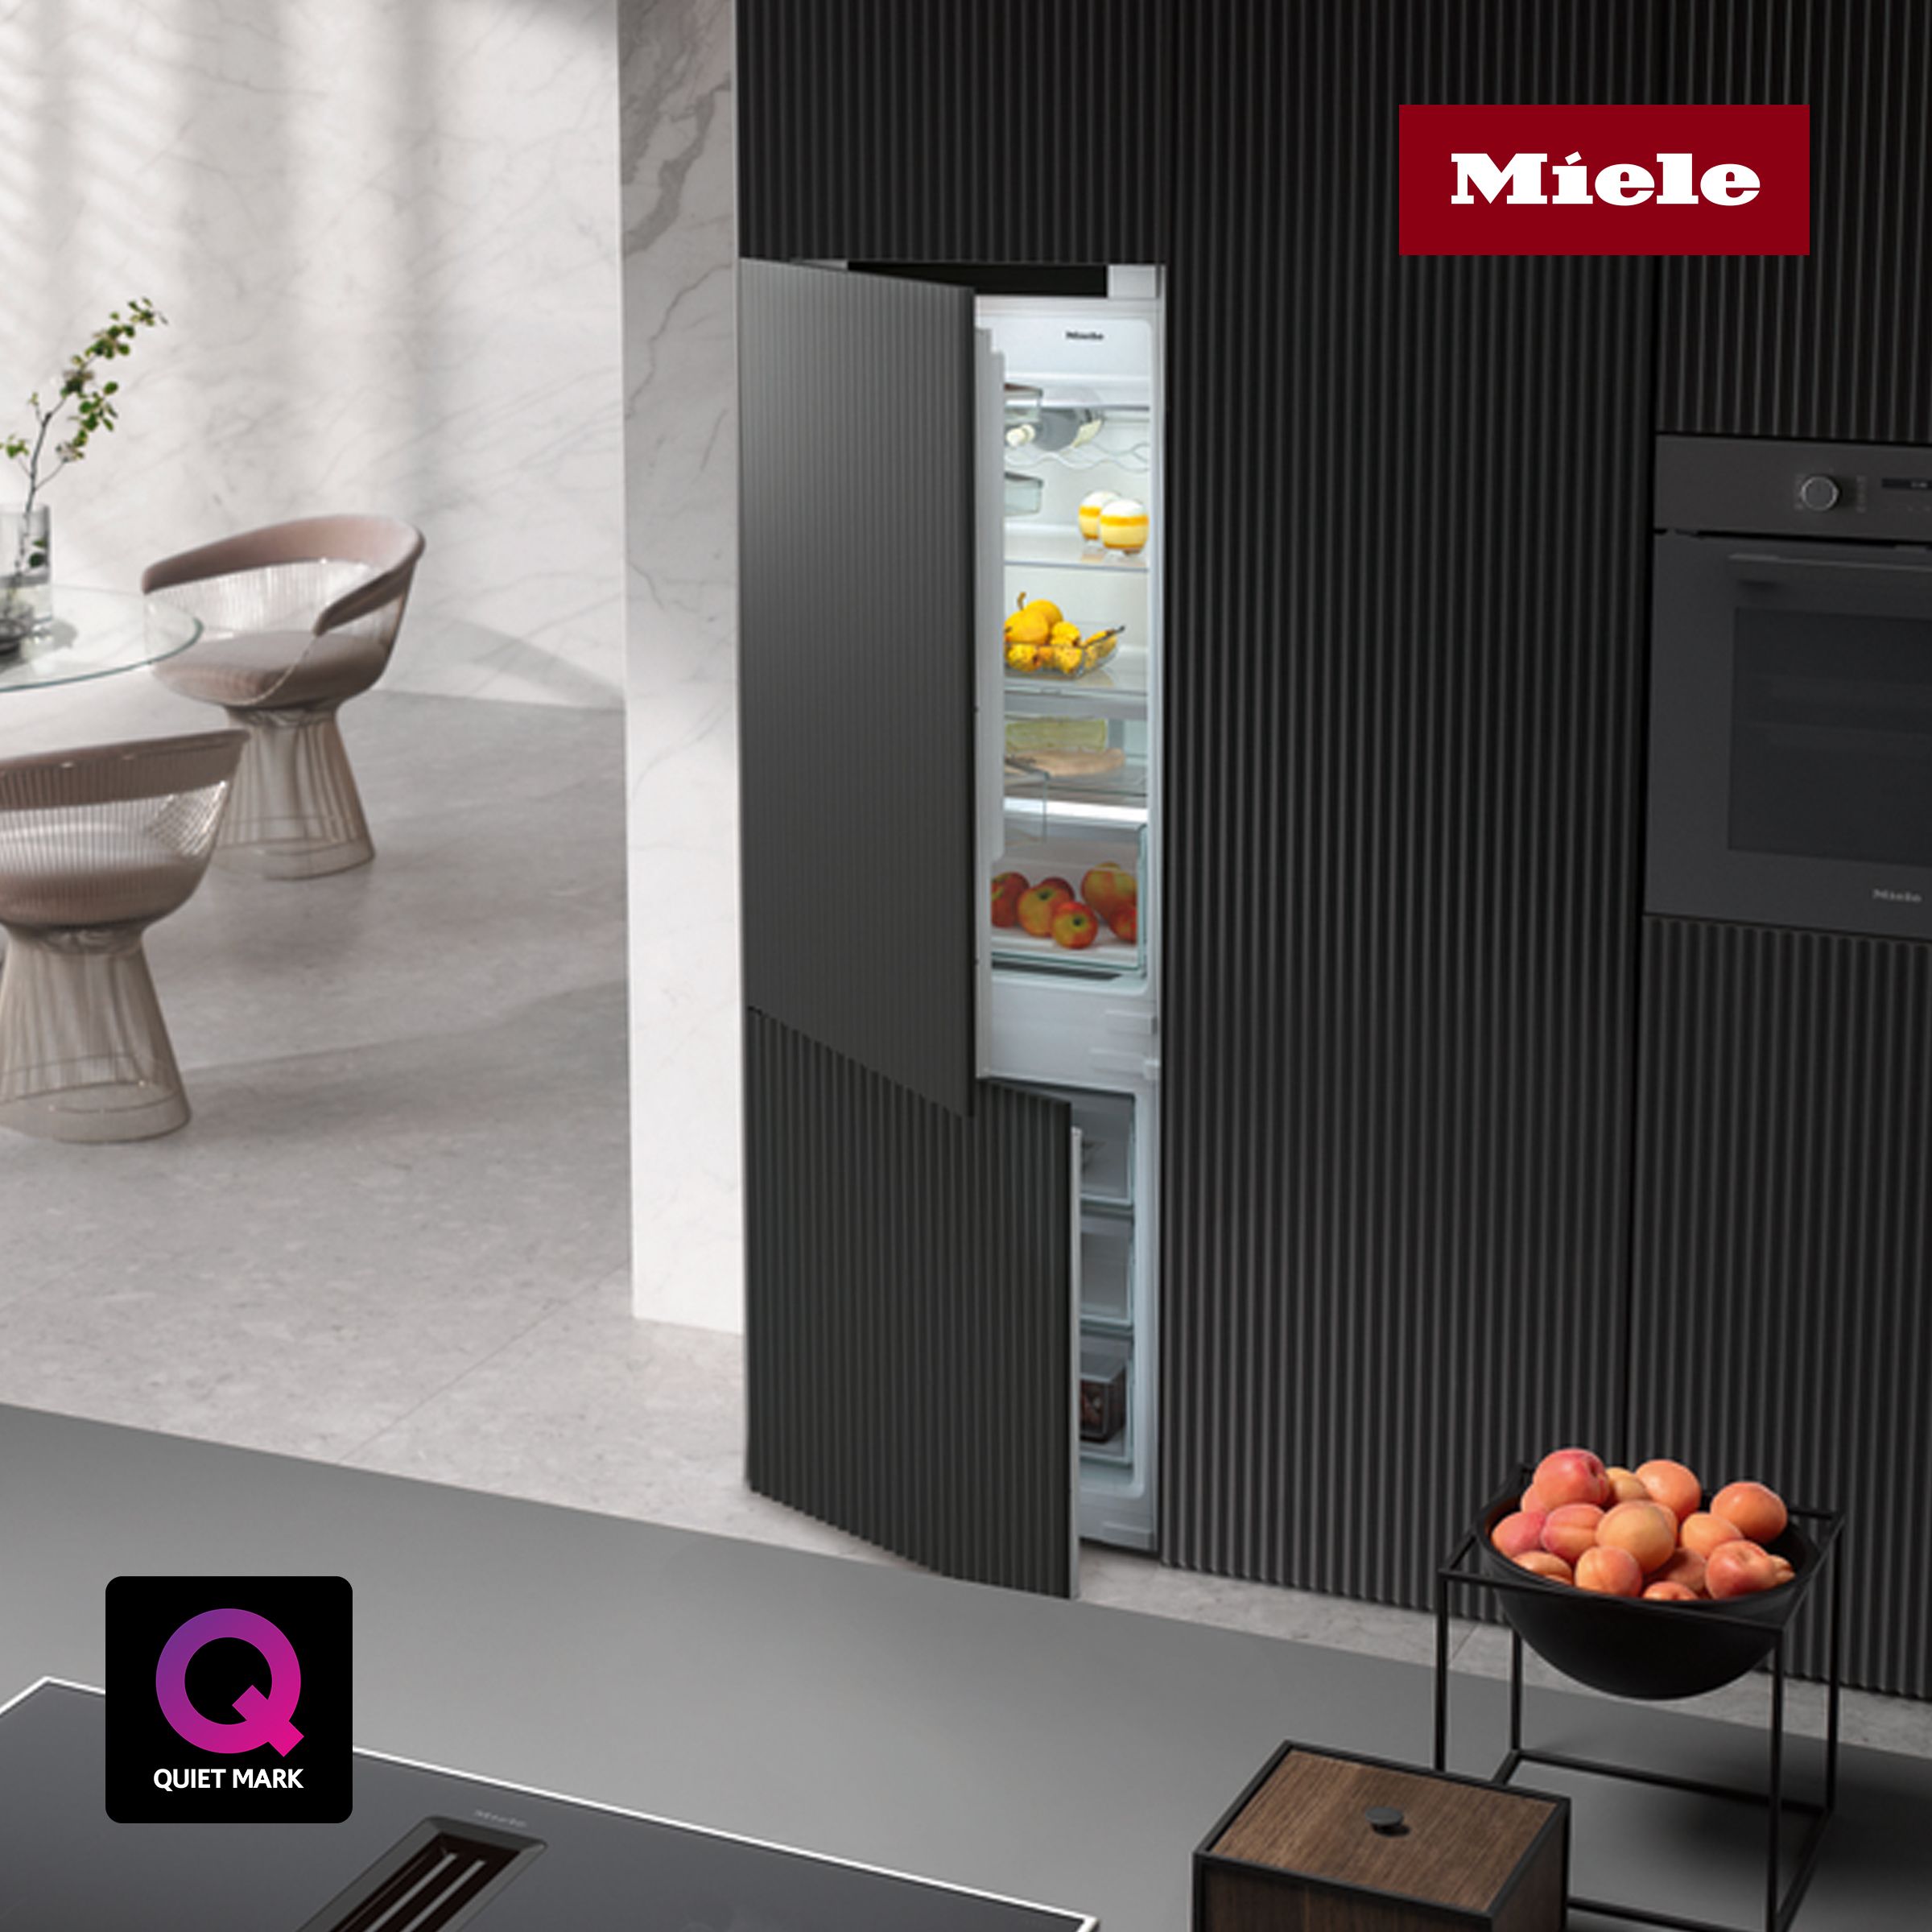 Miele fridge on a grey backround. - Long Story Short: 125 Years of Quality with Miele